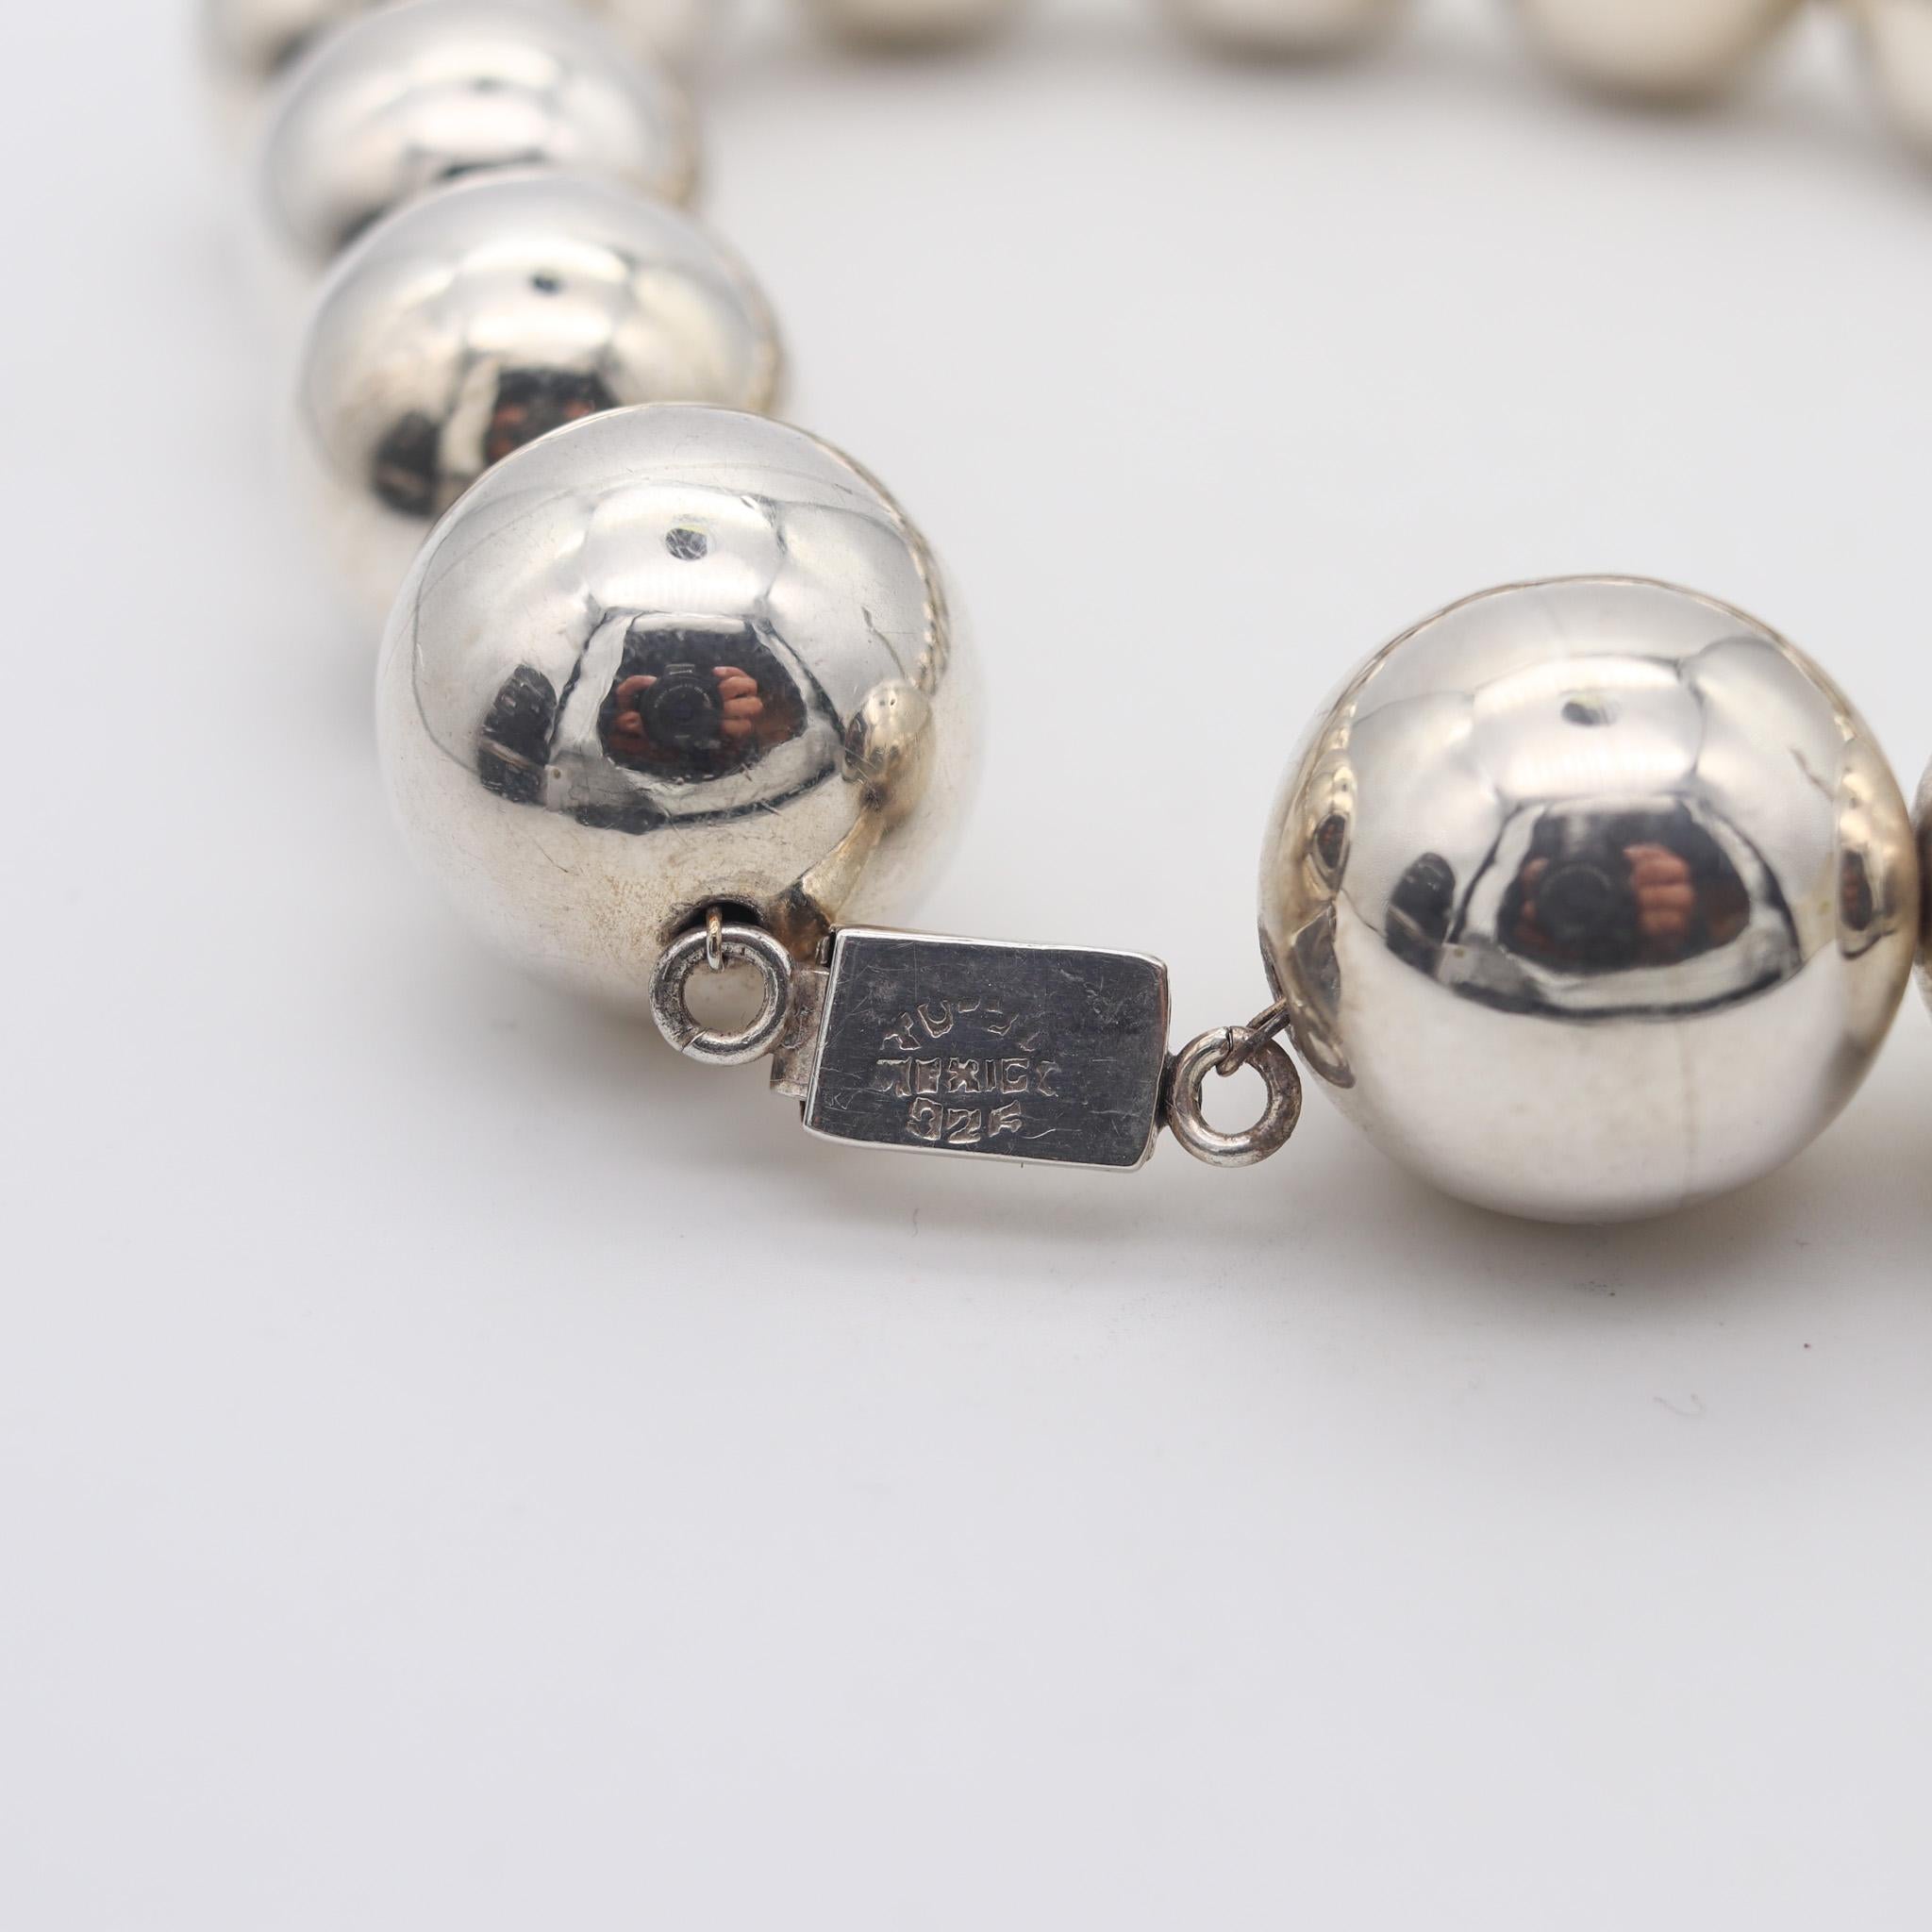 Mexico 1970 Modernist Spherical Balls Necklace in Solid .925 Sterling Silver In Excellent Condition For Sale In Miami, FL